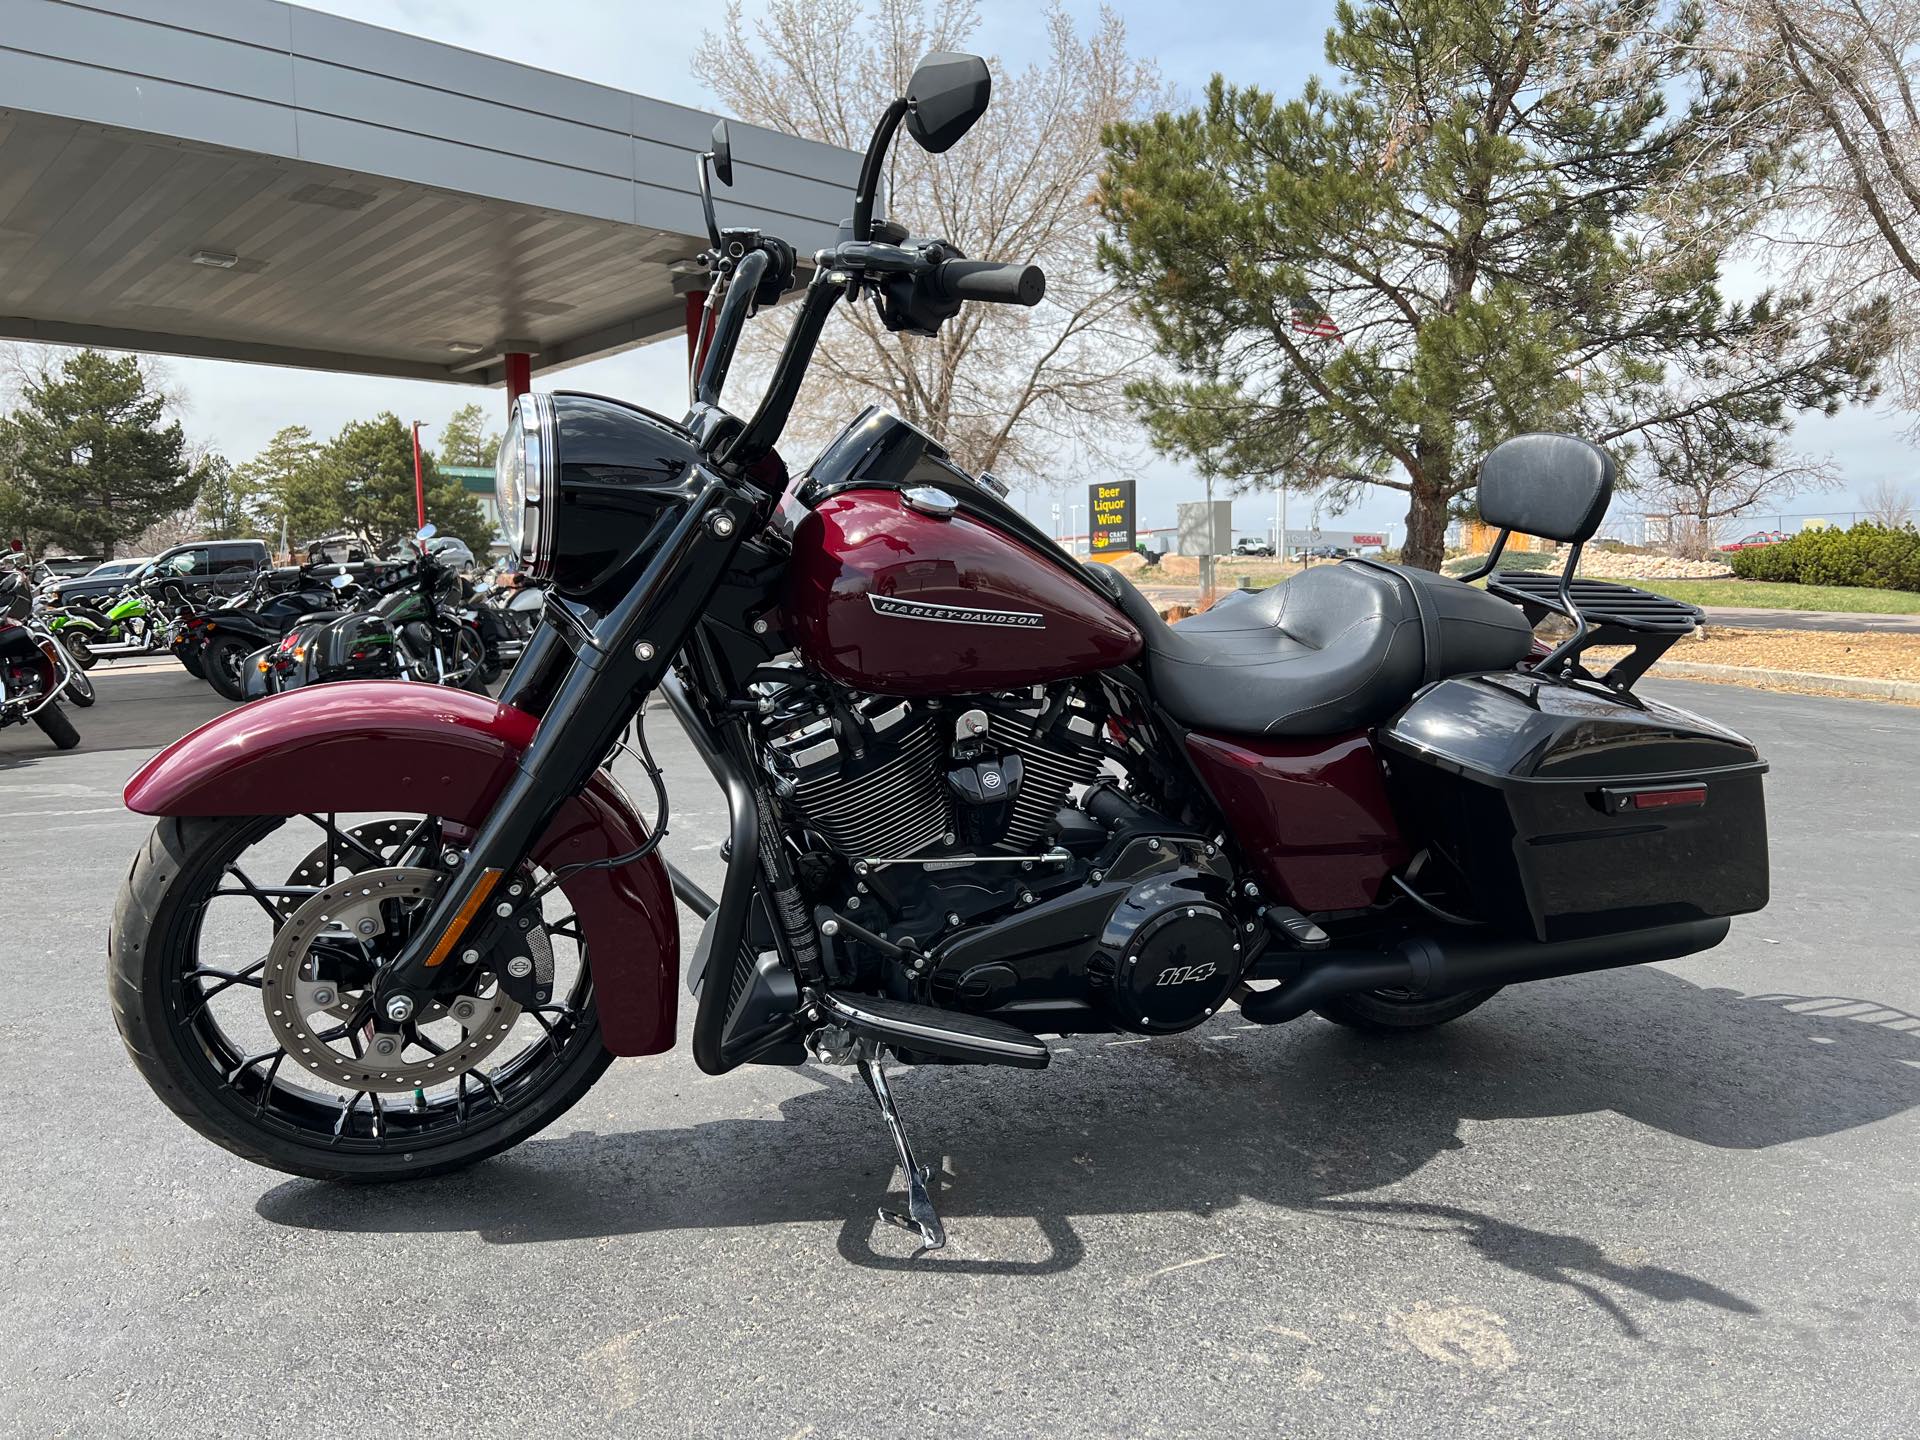 2020 Harley-Davidson Touring Road King Special at Aces Motorcycles - Fort Collins